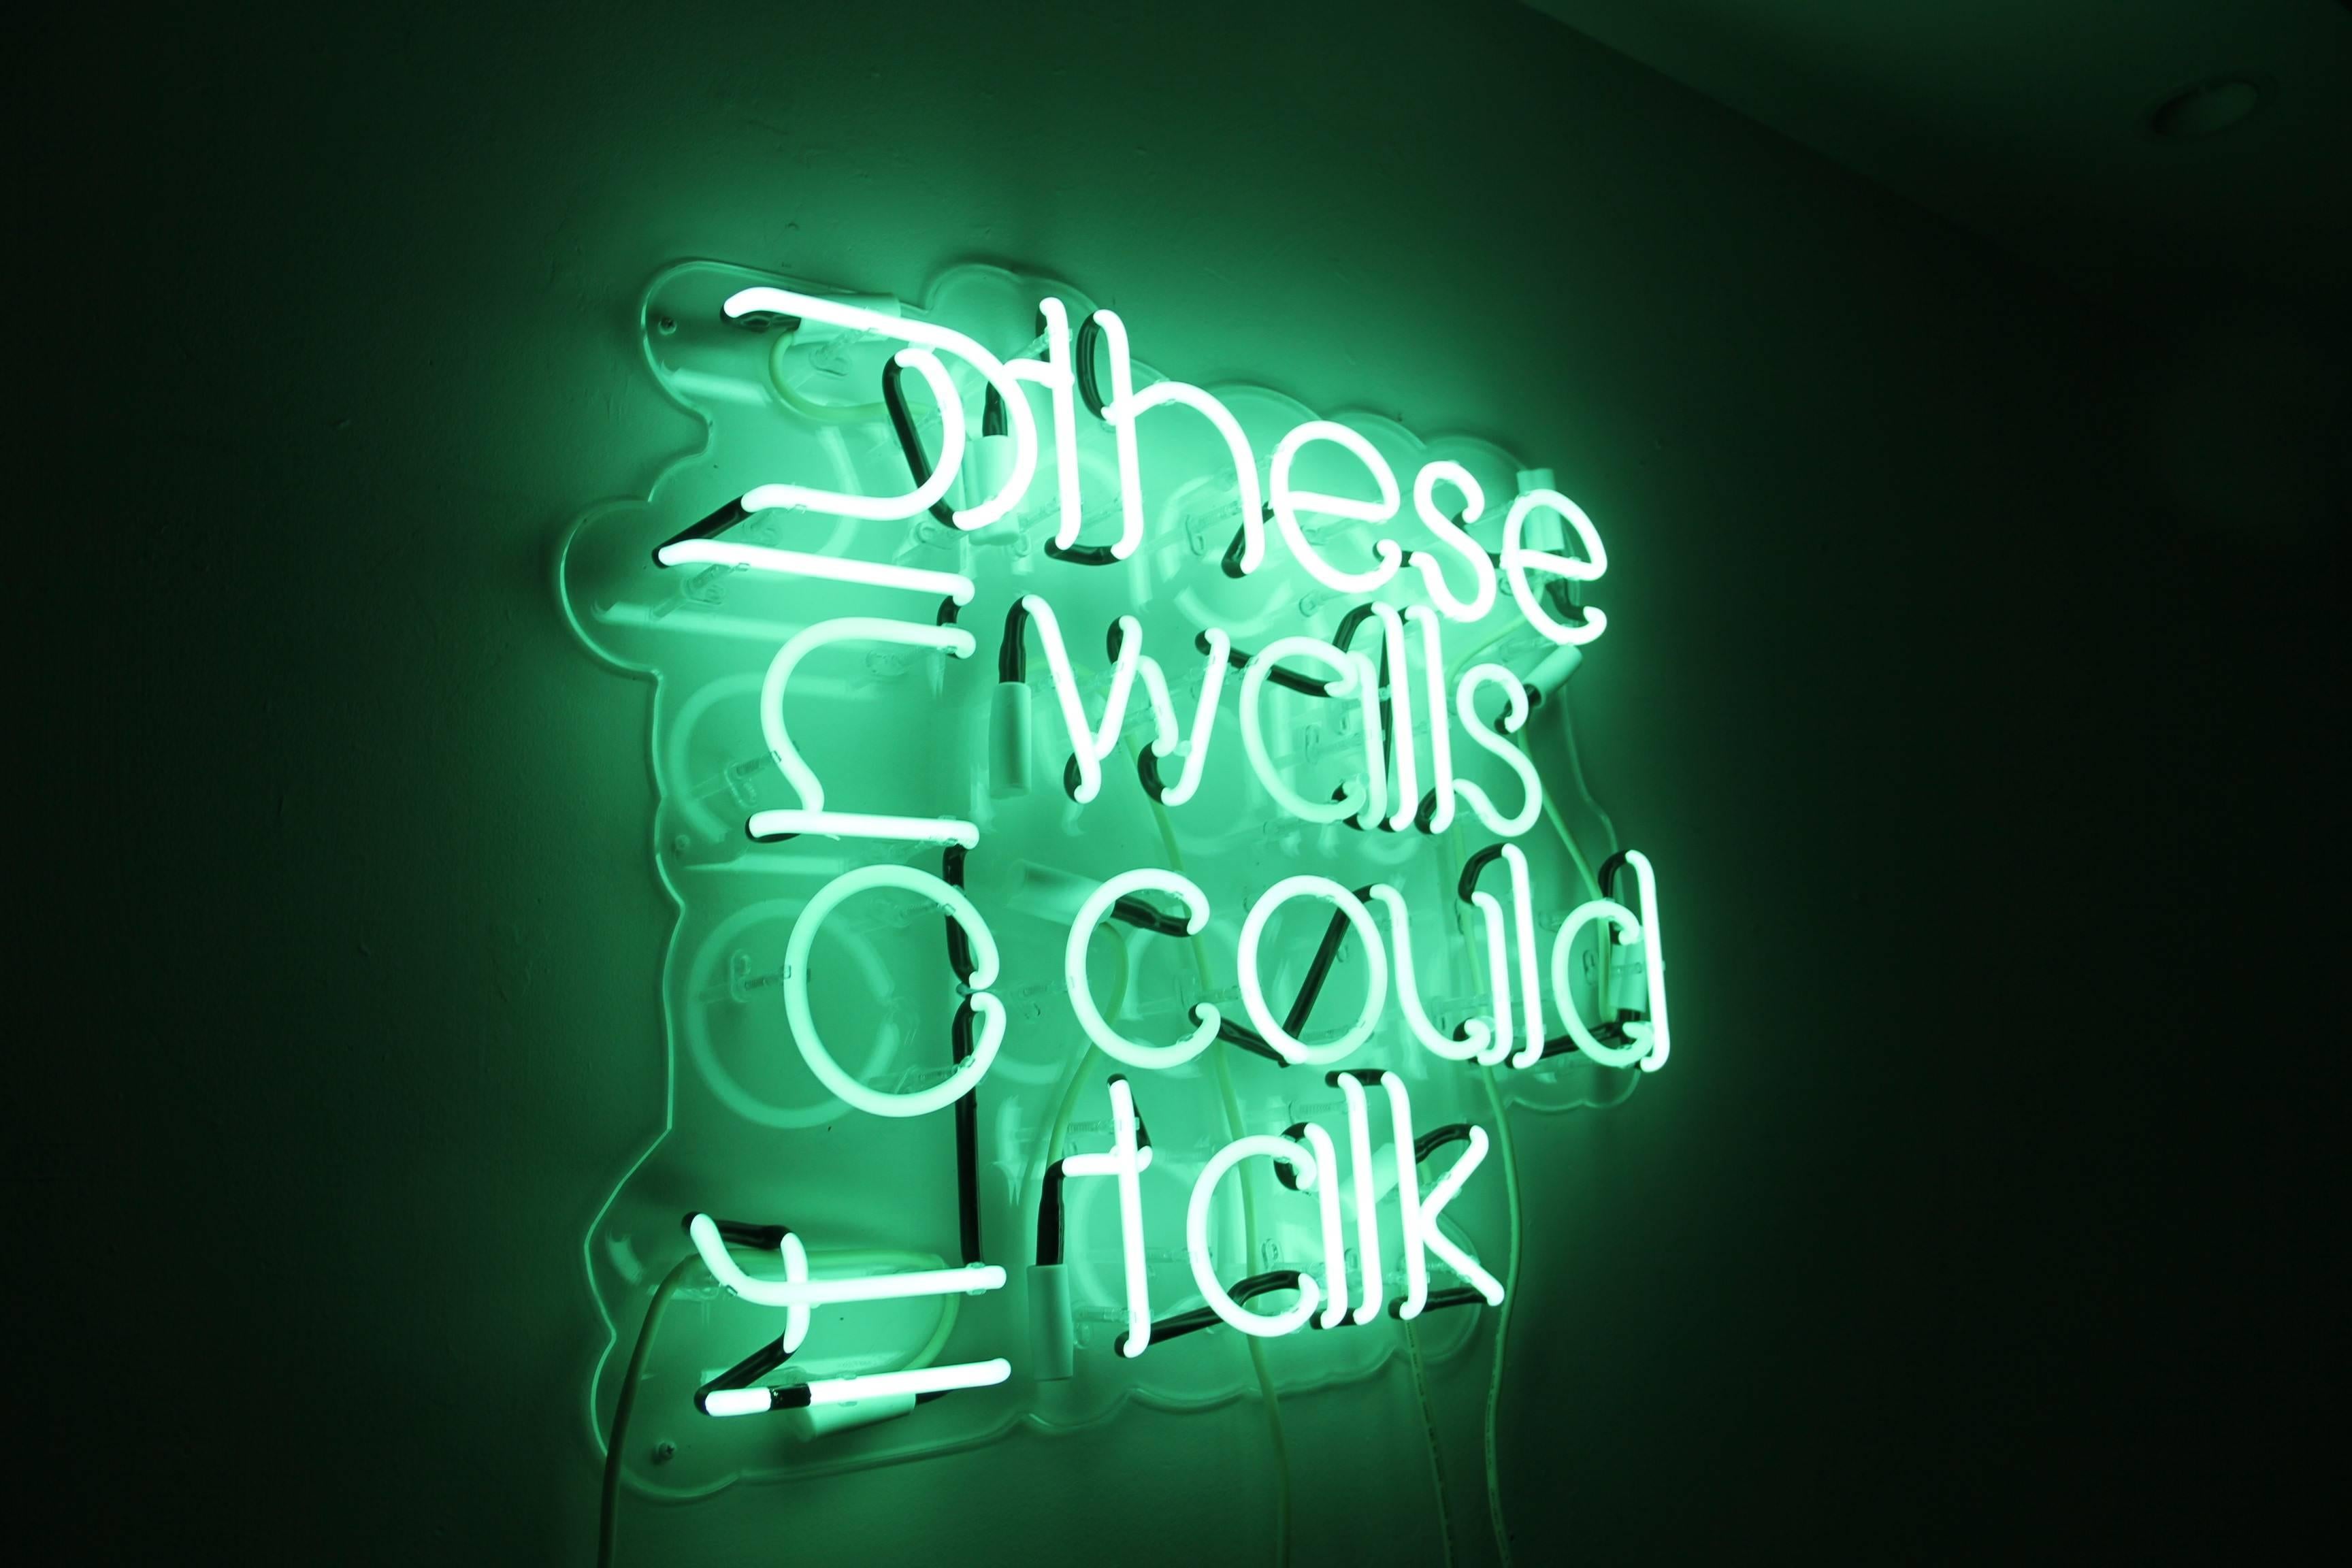 if these walls could talk neon sign